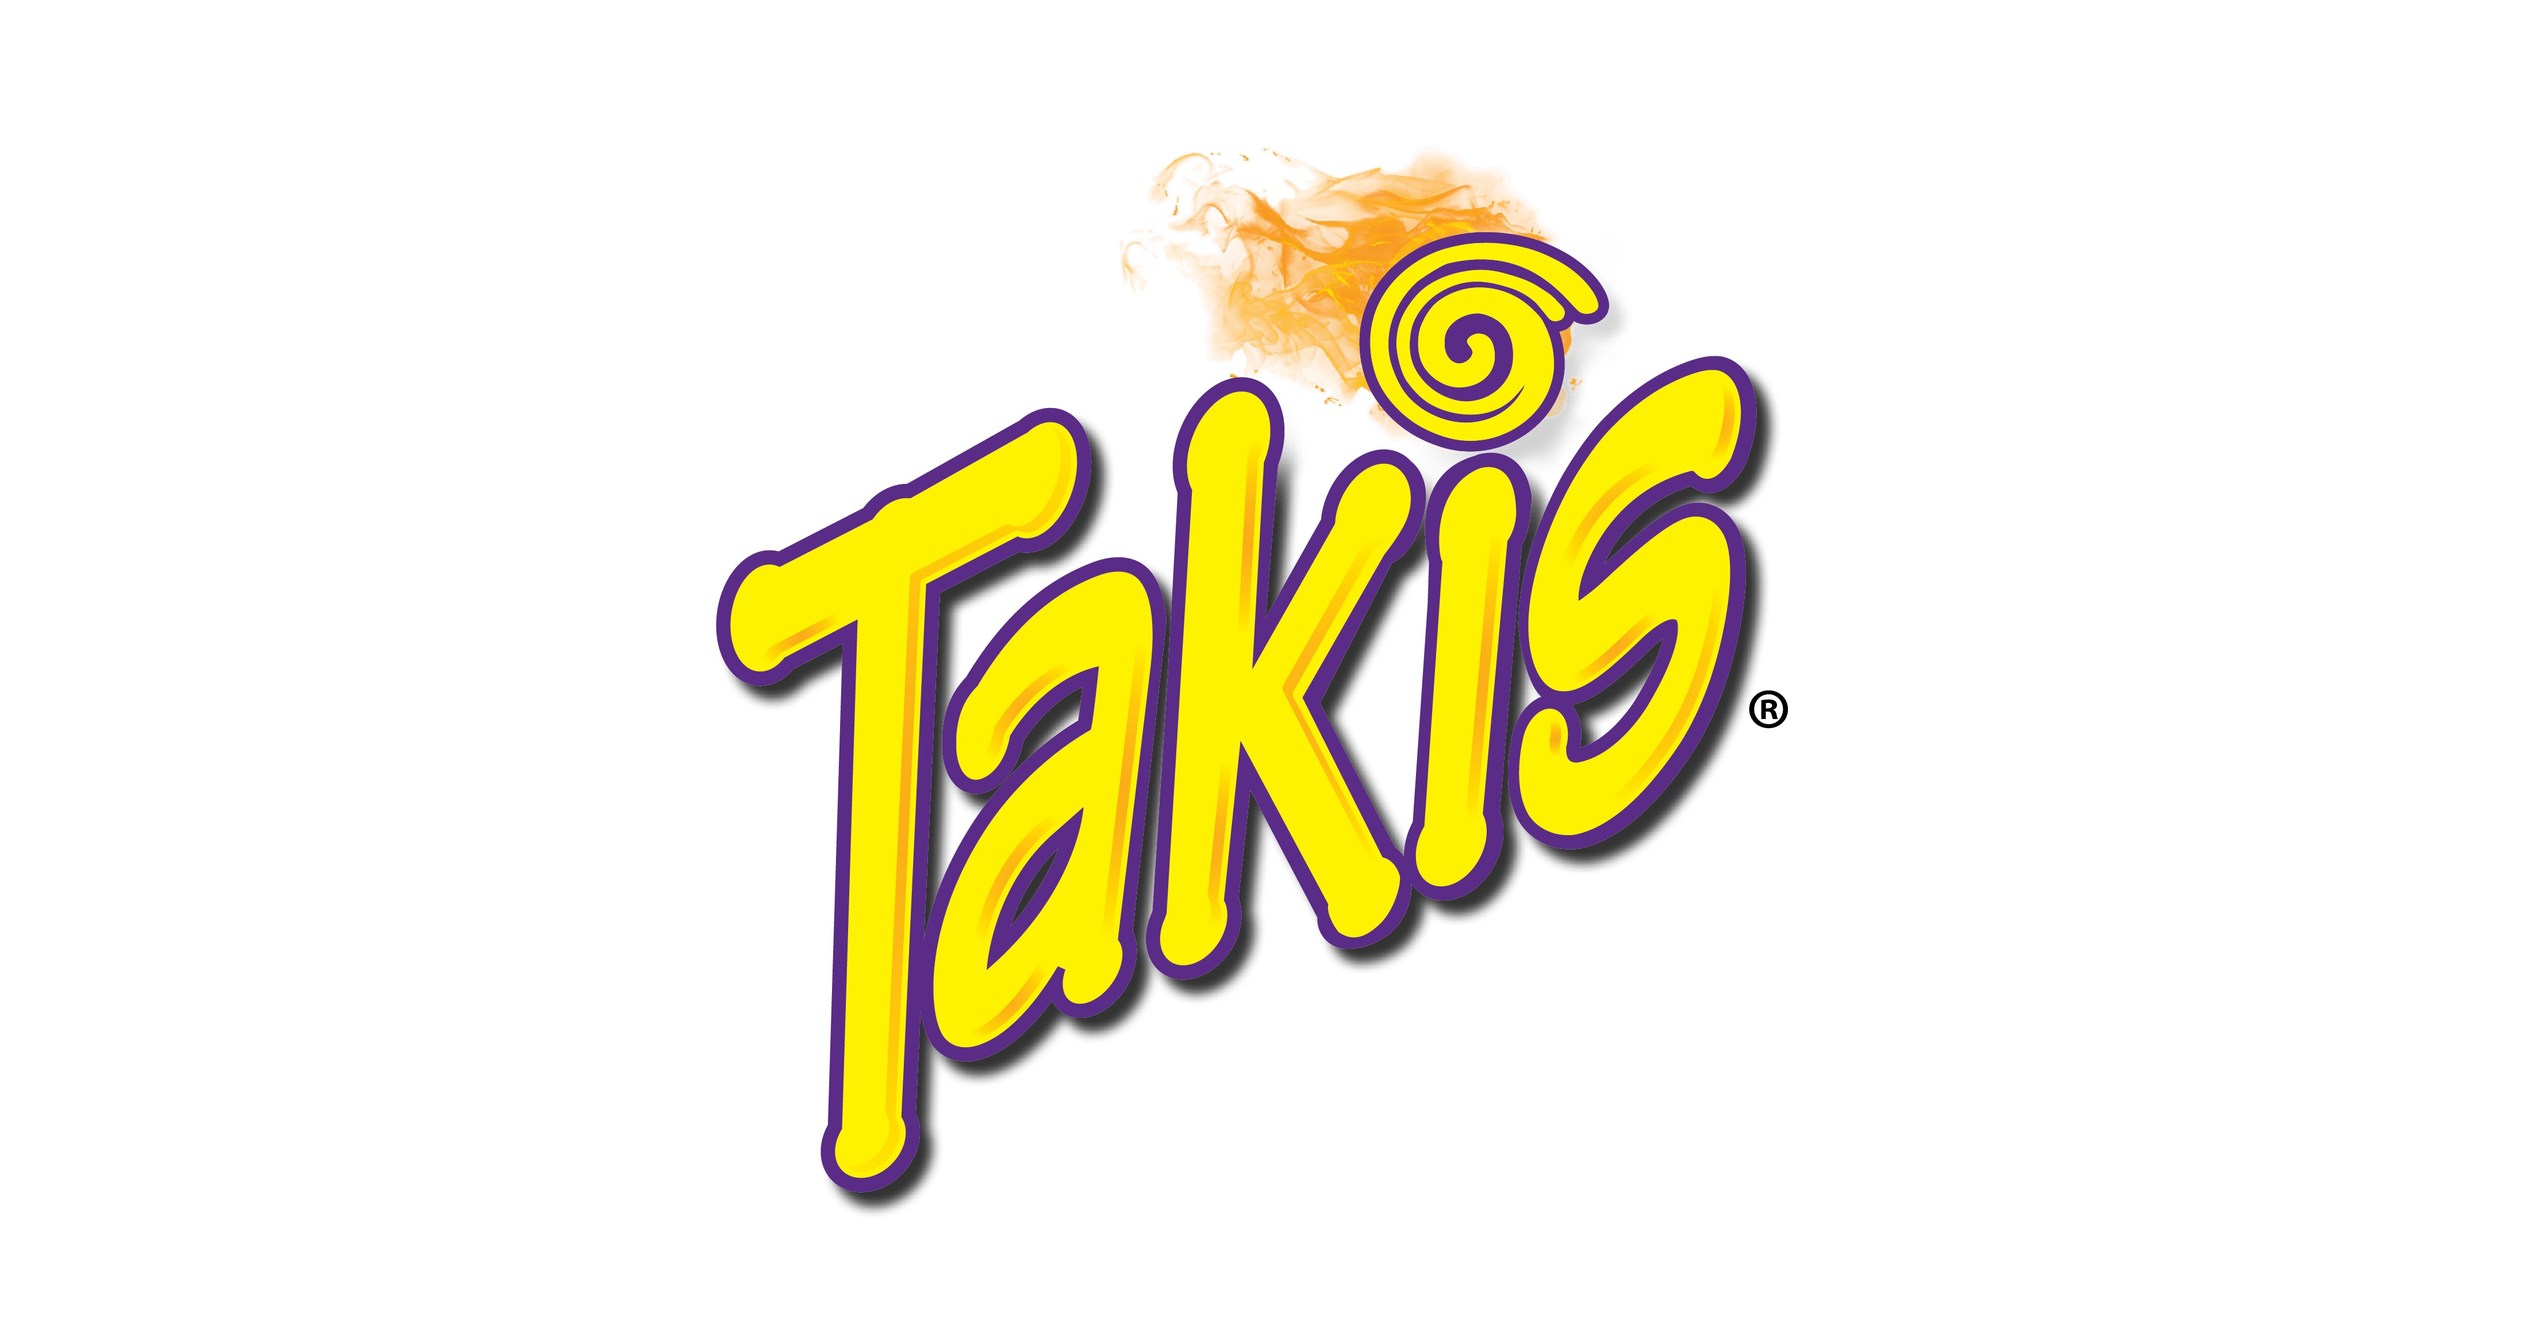 Takis® Says Cheese With Introduction of Takis® Intense Nacho Line